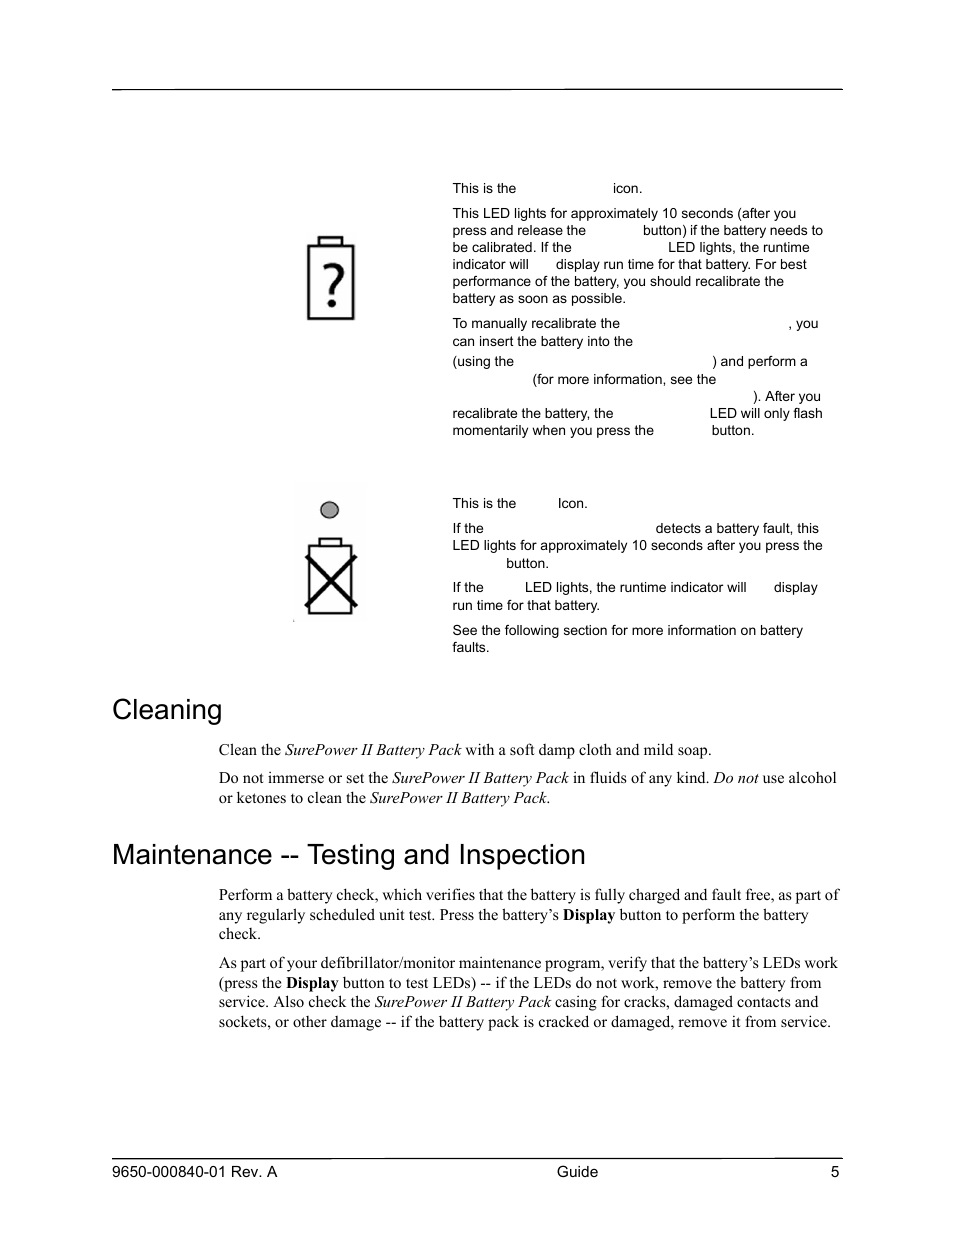 Cleaning, Maintenance -- testing and inspection | ZOLL X Series Monitor Defibrillator Rev A User Manual | Page 7 / 10